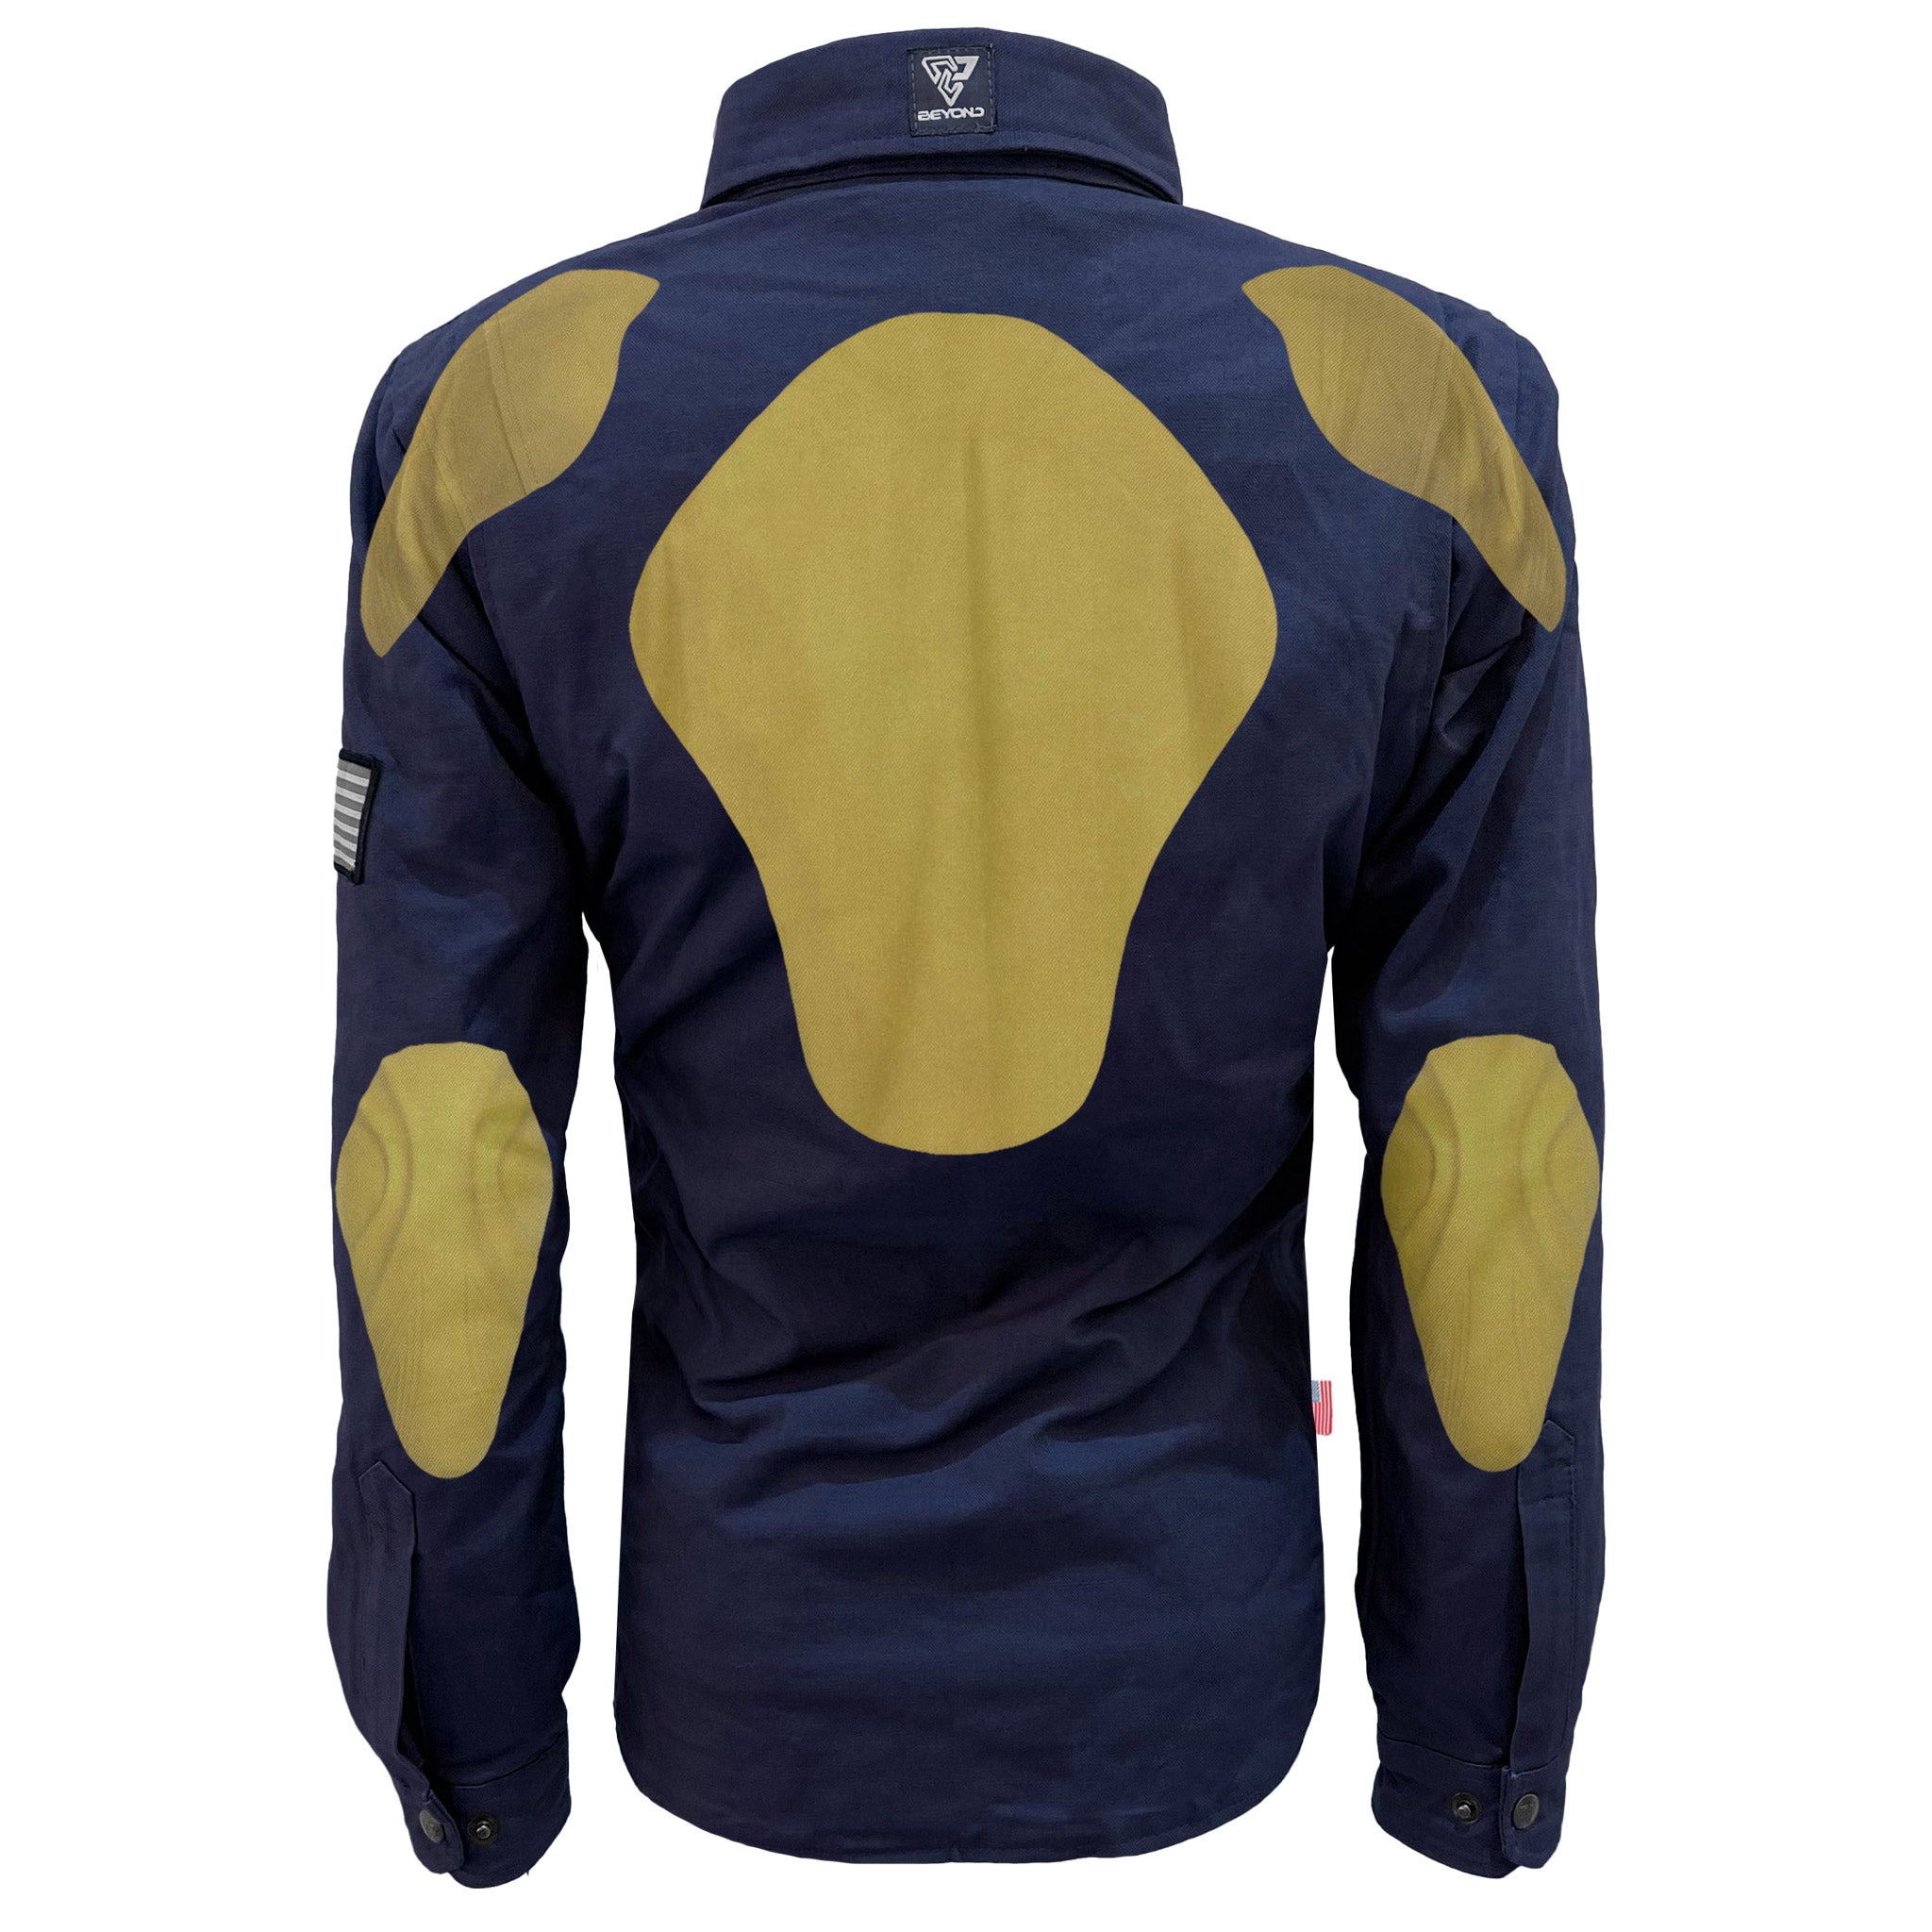 Protective Canvas Jacket for Women - Navy Blue with Pads